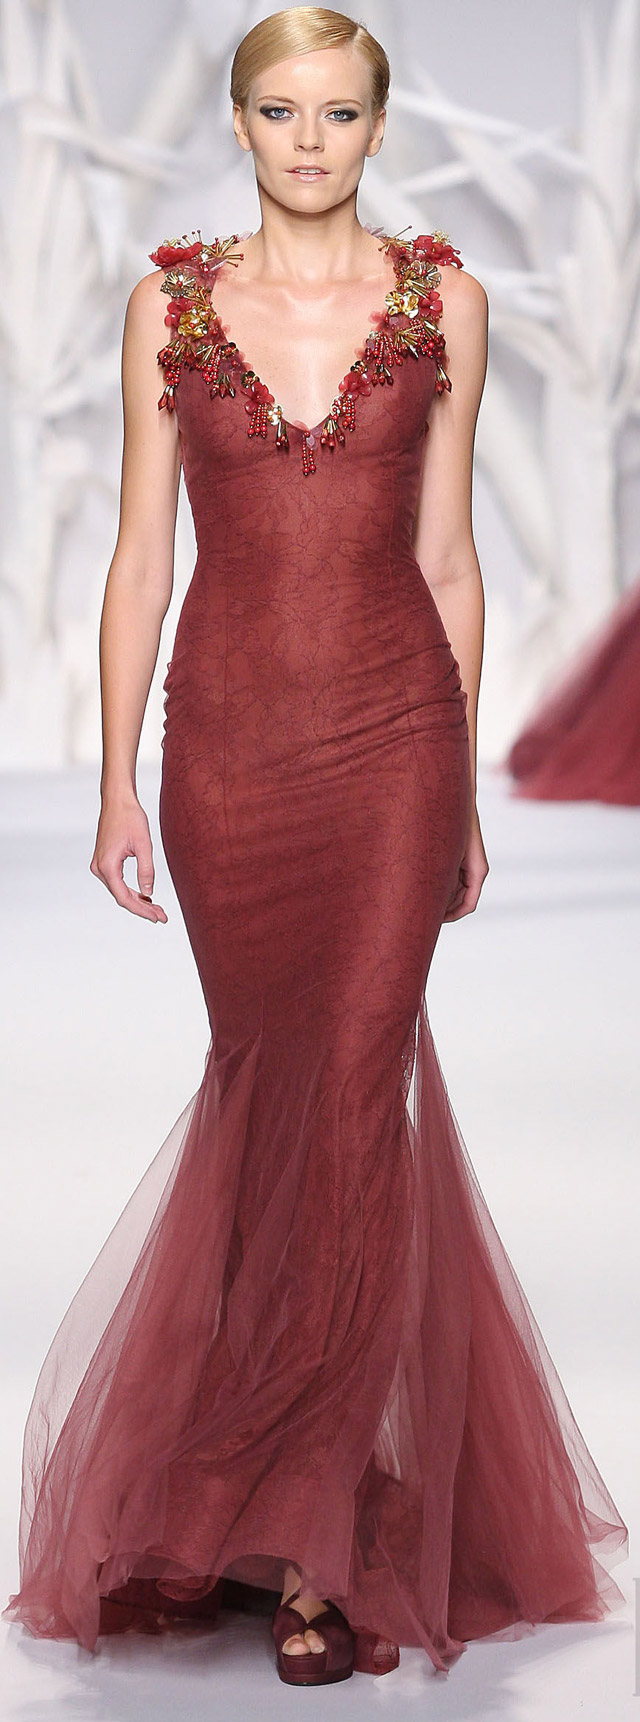 Abed Mahfouz Haute Couture Fall-Winter 2013-2014